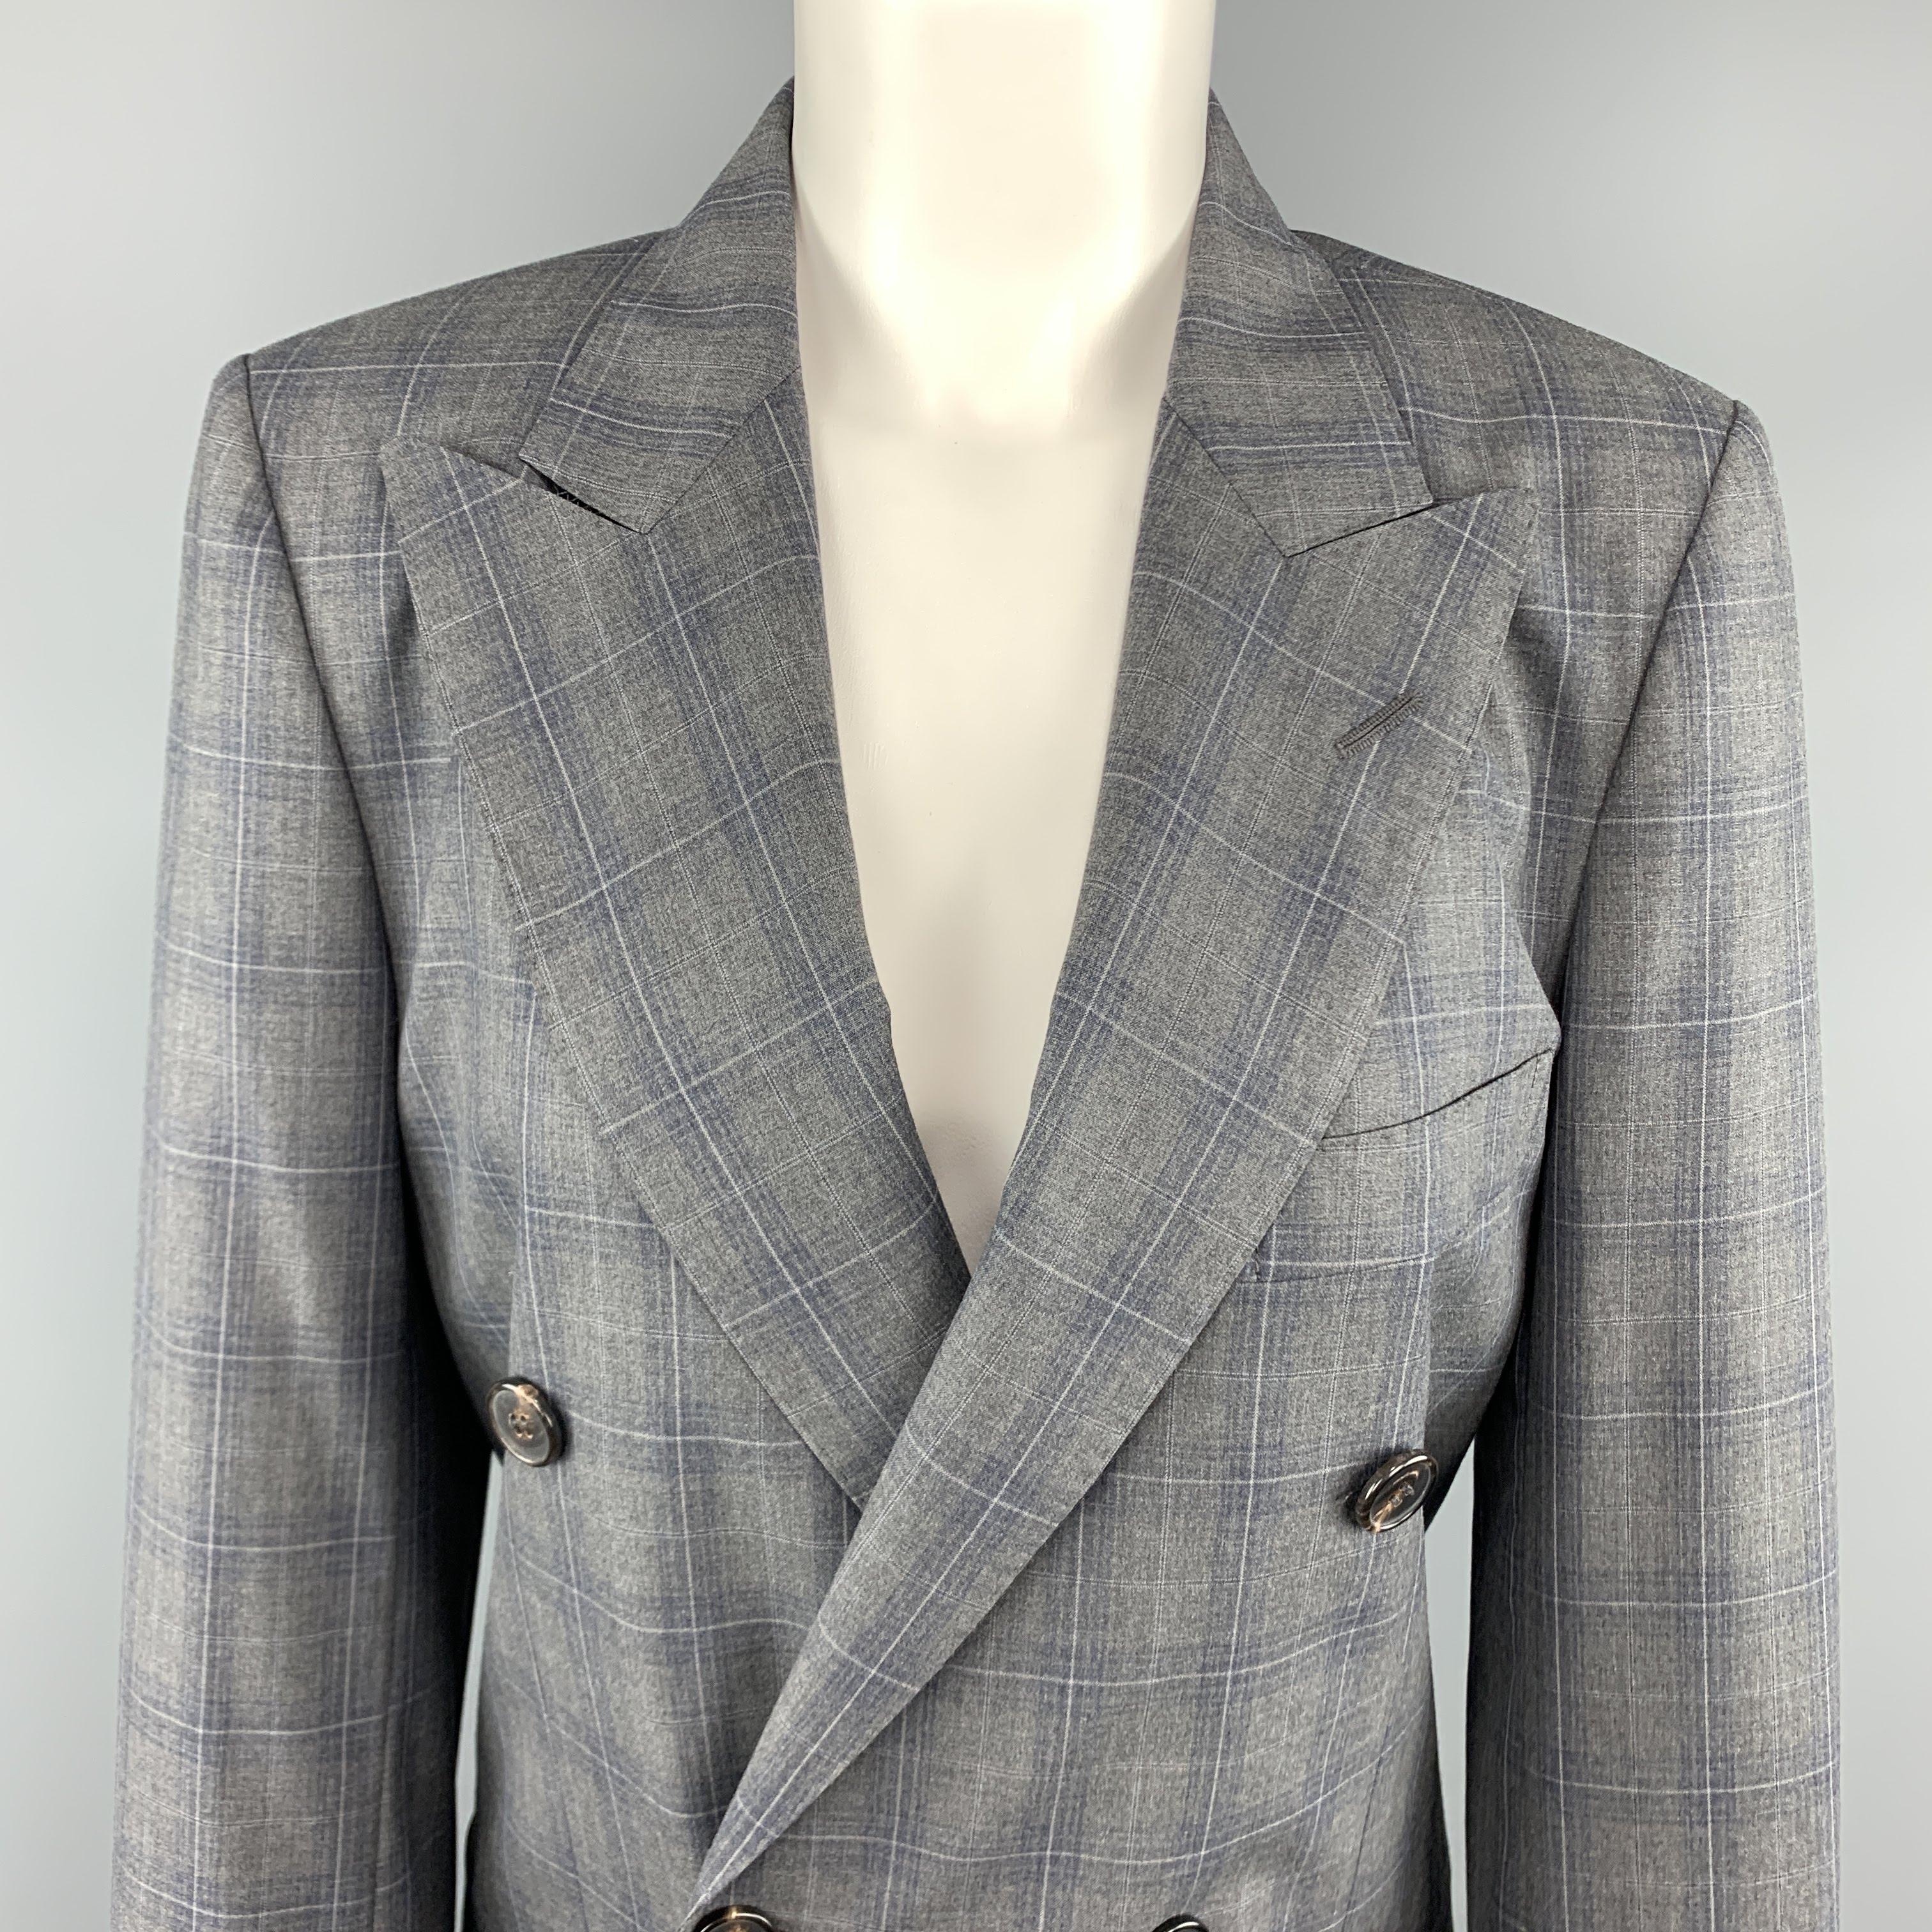 MAISON MARGIELA blazer jacket comes in cool gray light weight wool with blue plaid pattern and features a peak lapel, double breasted front, and signature white stitch detailed back. Made in Italy.
 
New with Tags.
Marked: IT 40
 
Measurements:
